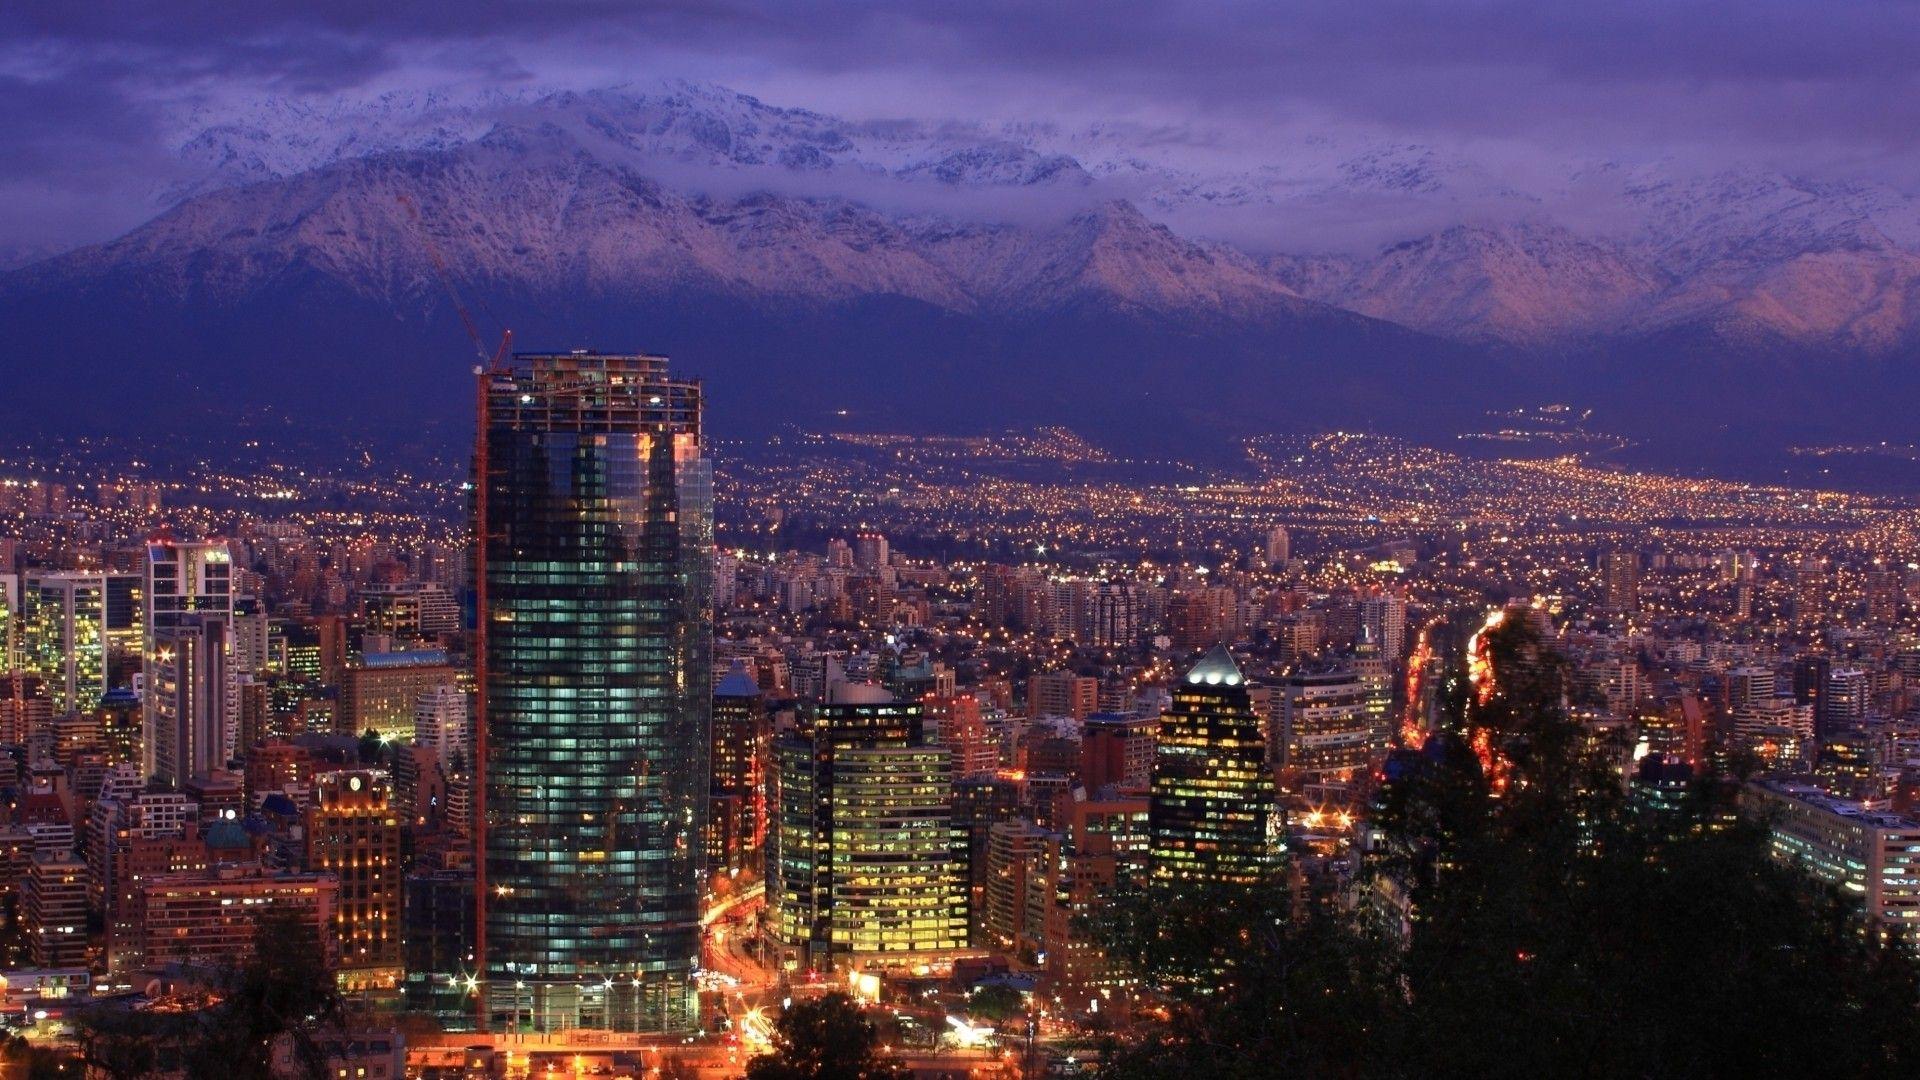 Other: Andes Mountains Santiago Chile Dusk Clouds City Lights Free